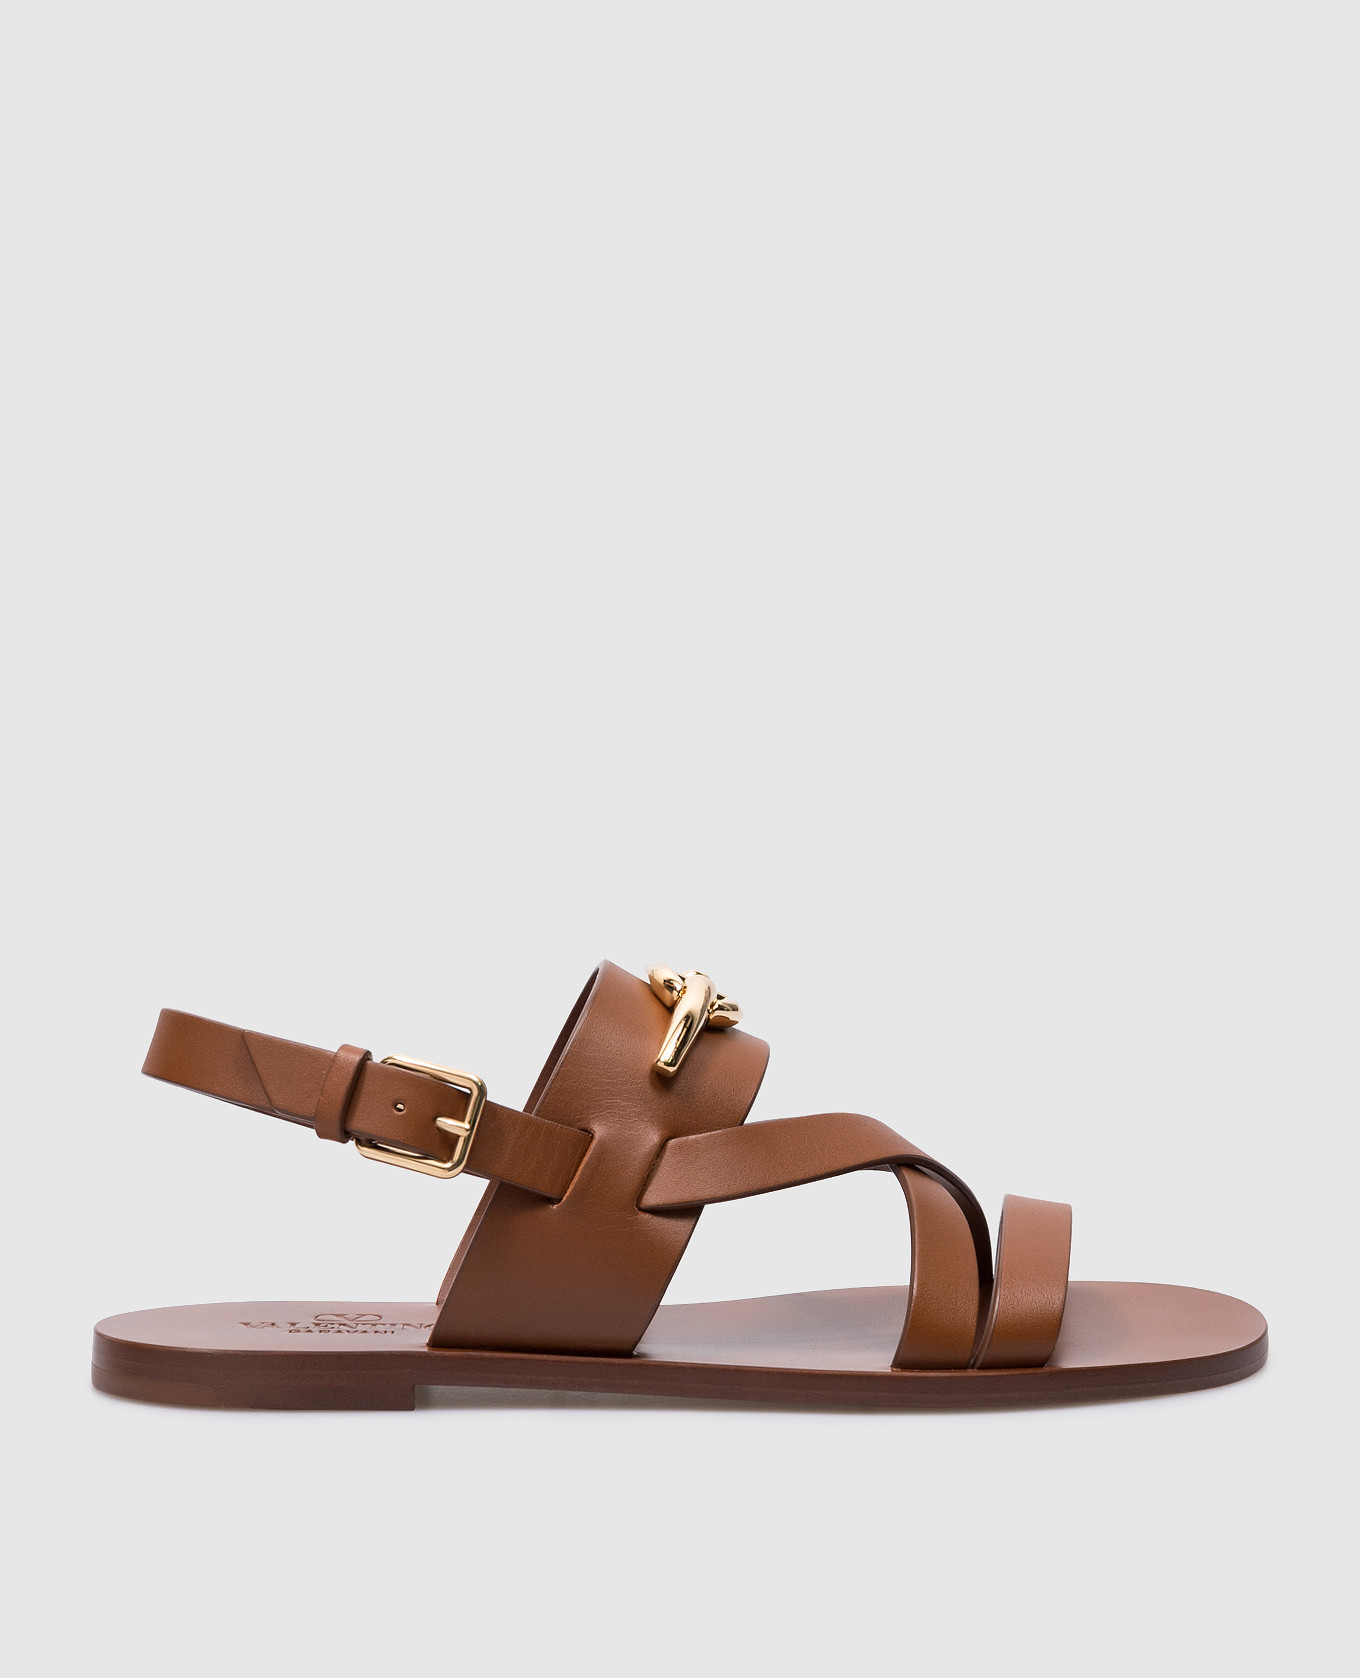 VLOGO SIGNATURE brown leather sandals